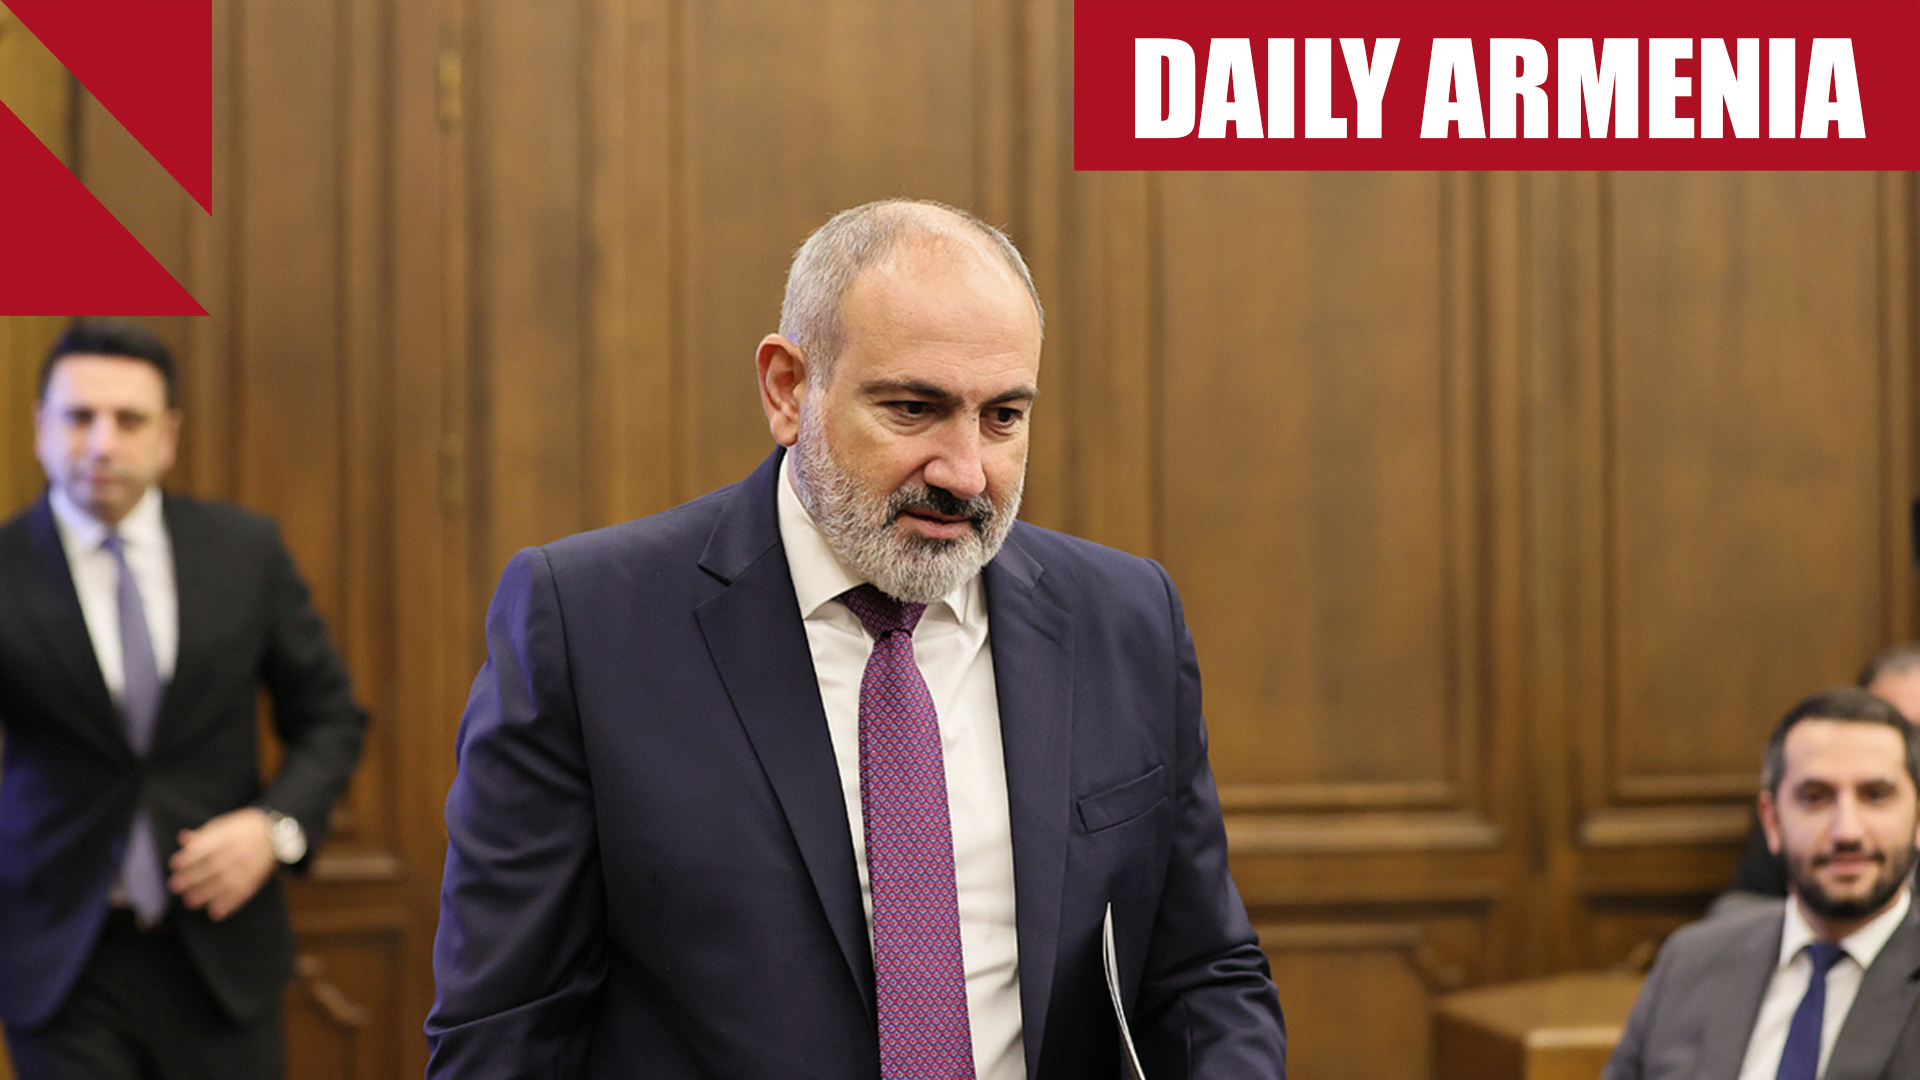 Understanding reached on ‘main principles’ for peace treaty: Pashinyan